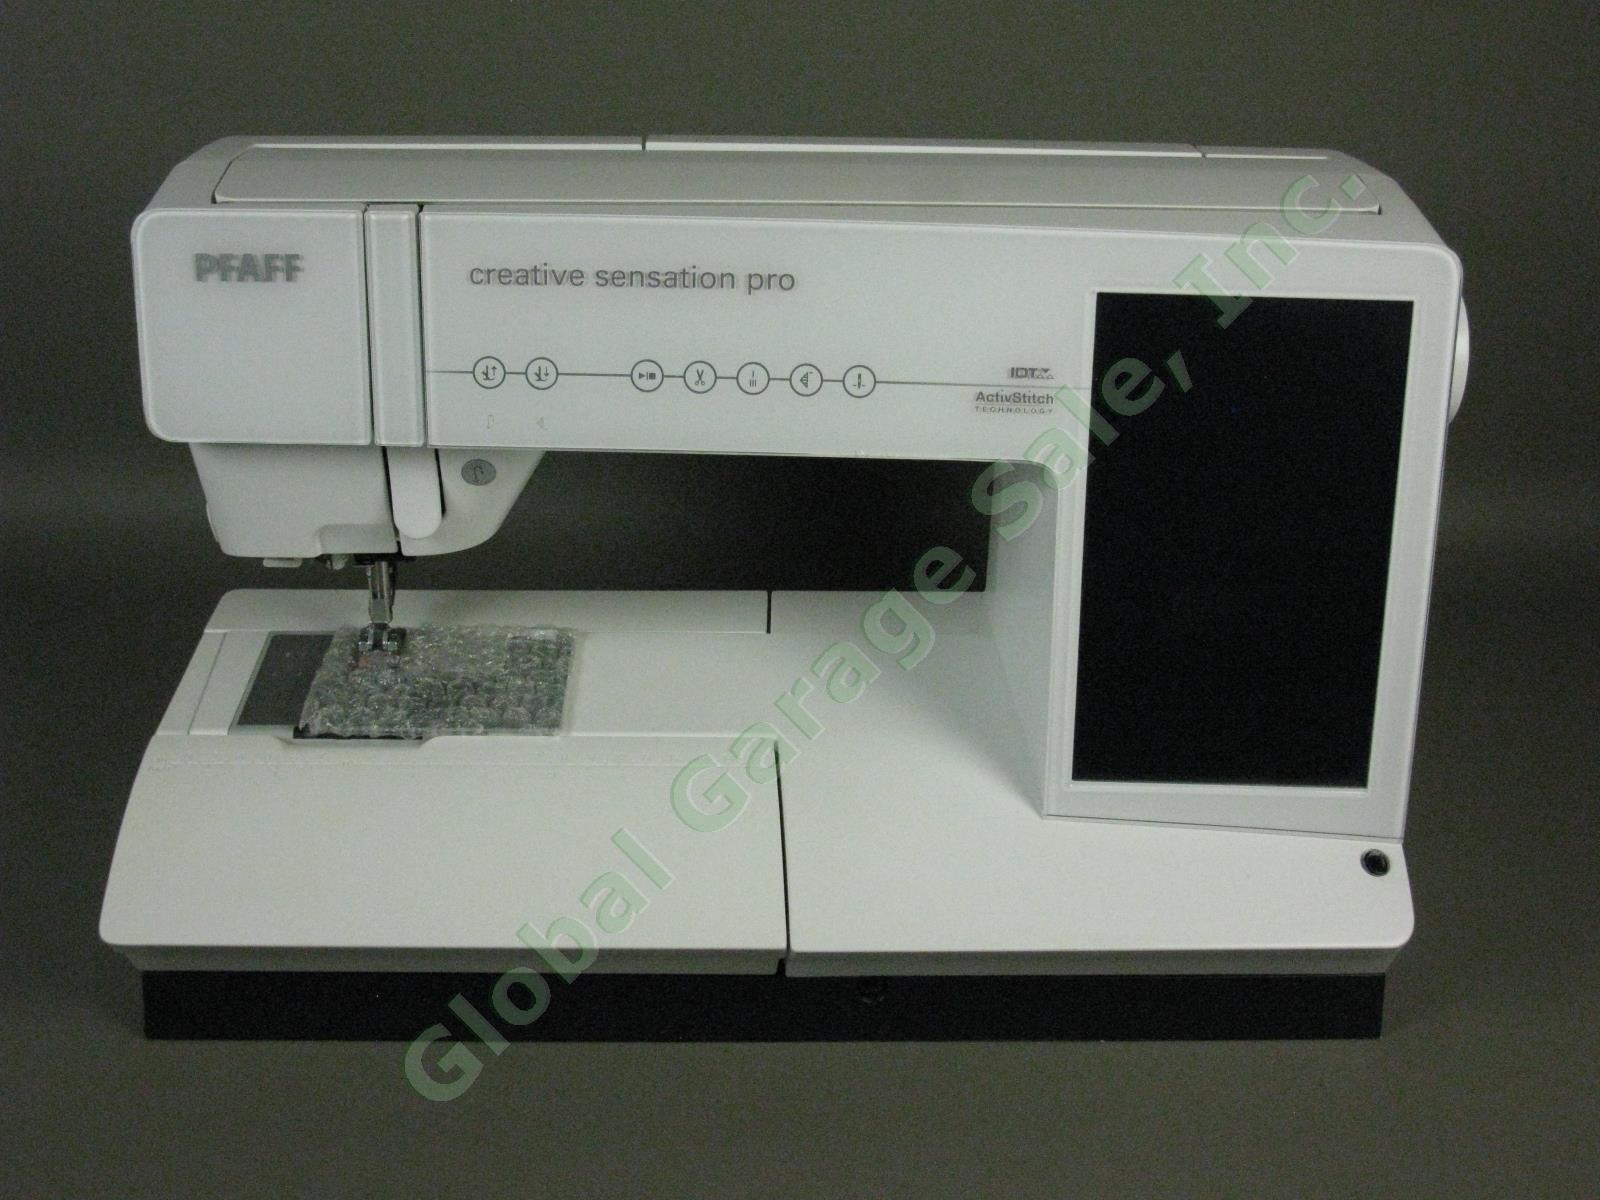 Pfaff Creative Sensation Pro Sewing/Embroidery Machine 1 Owner Exc Cond Serviced 1